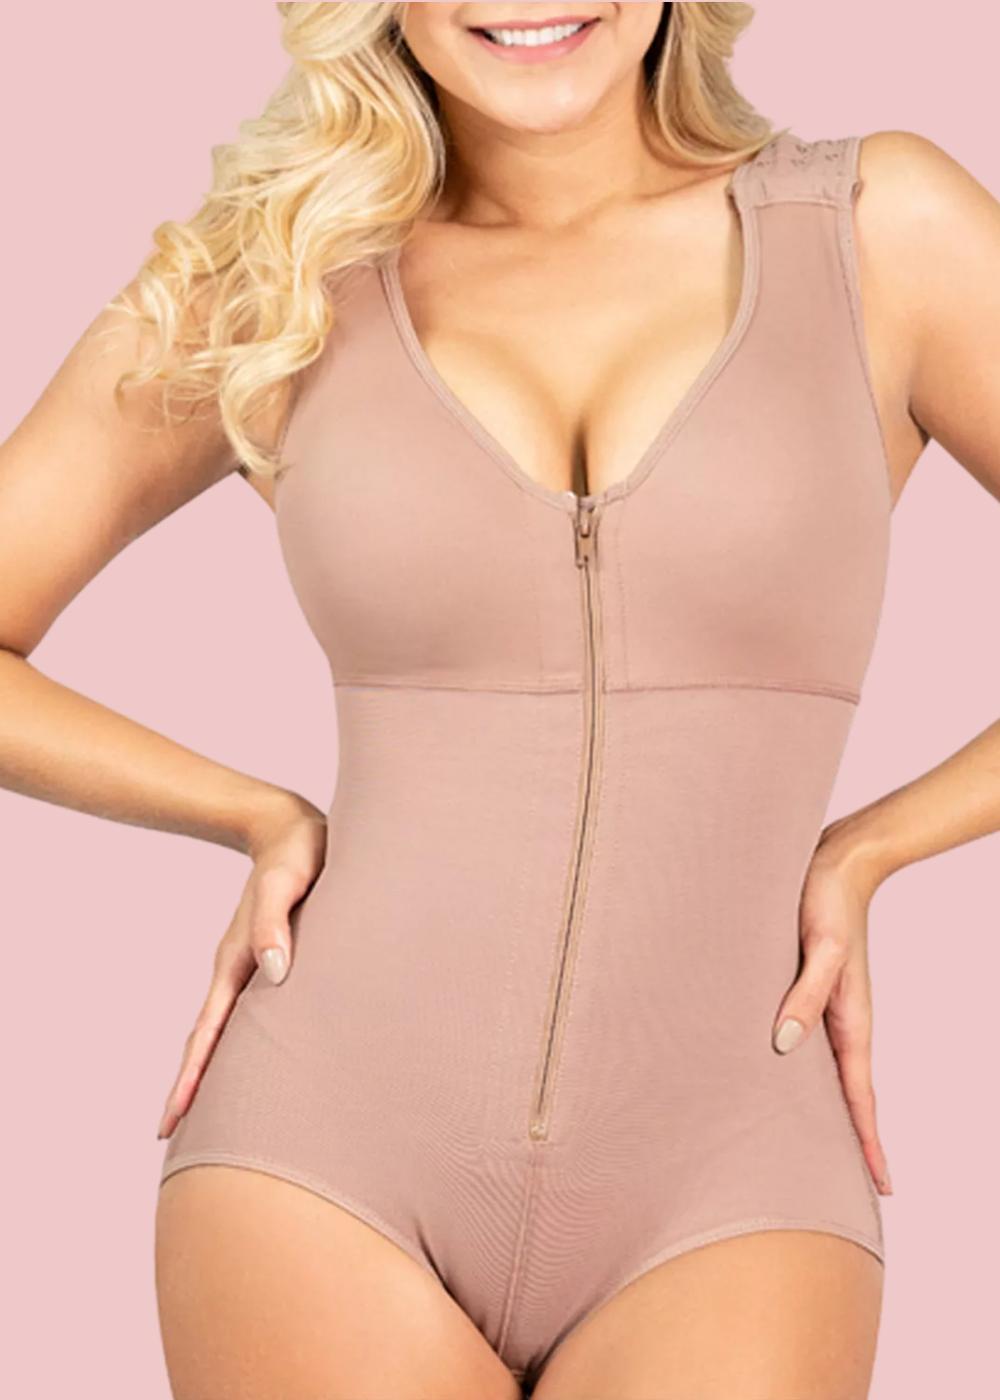 Sonryse | Panty Bodysuit Shapewear with Built-in Bra | Postpartum and Daily Use